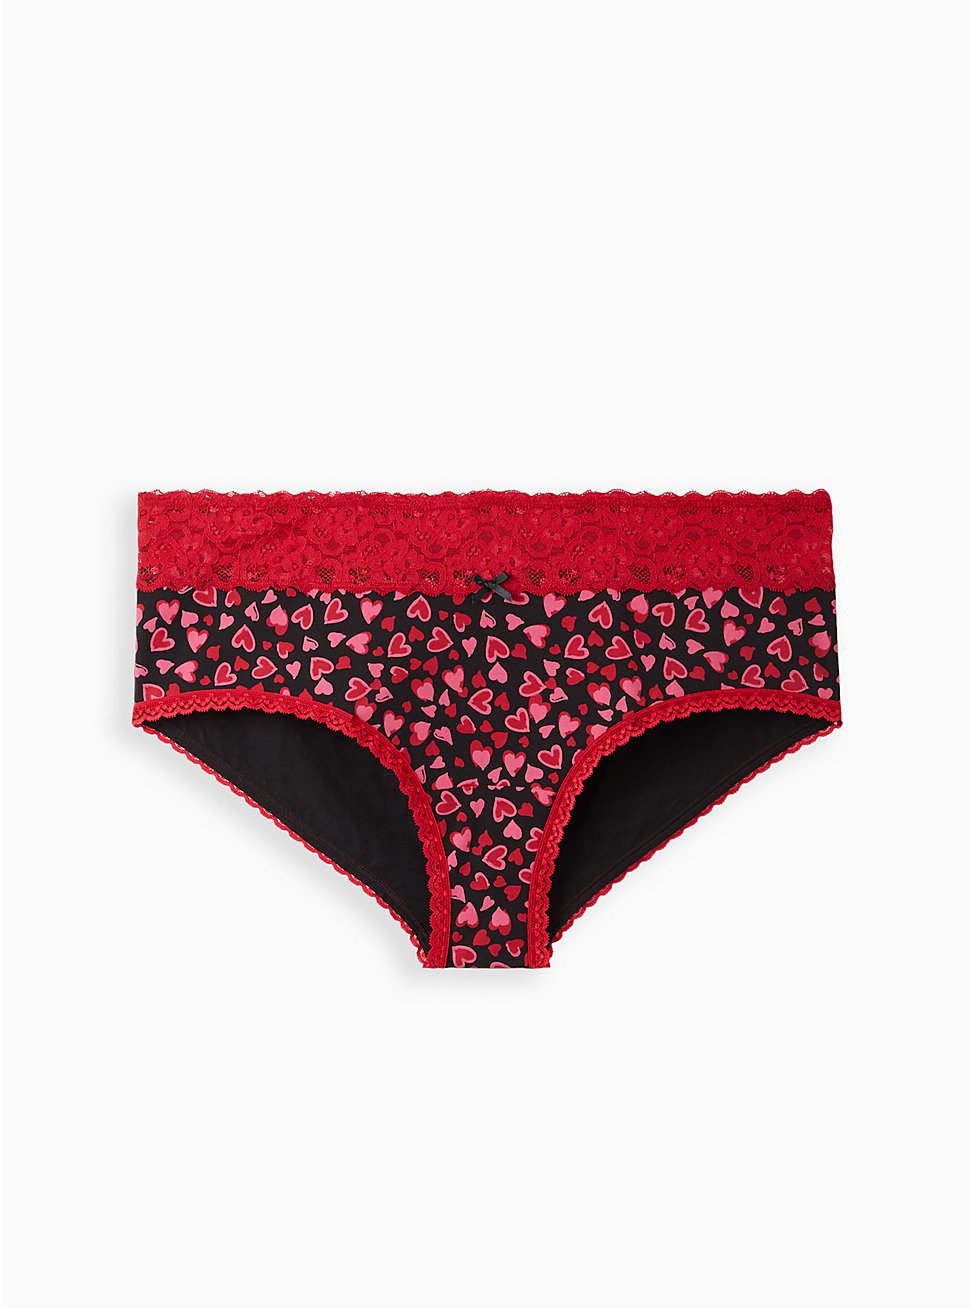 Plus Size Cheeky Panty - Cotton Wide Lace Hearts, CARTOON HEARTS, hi-res